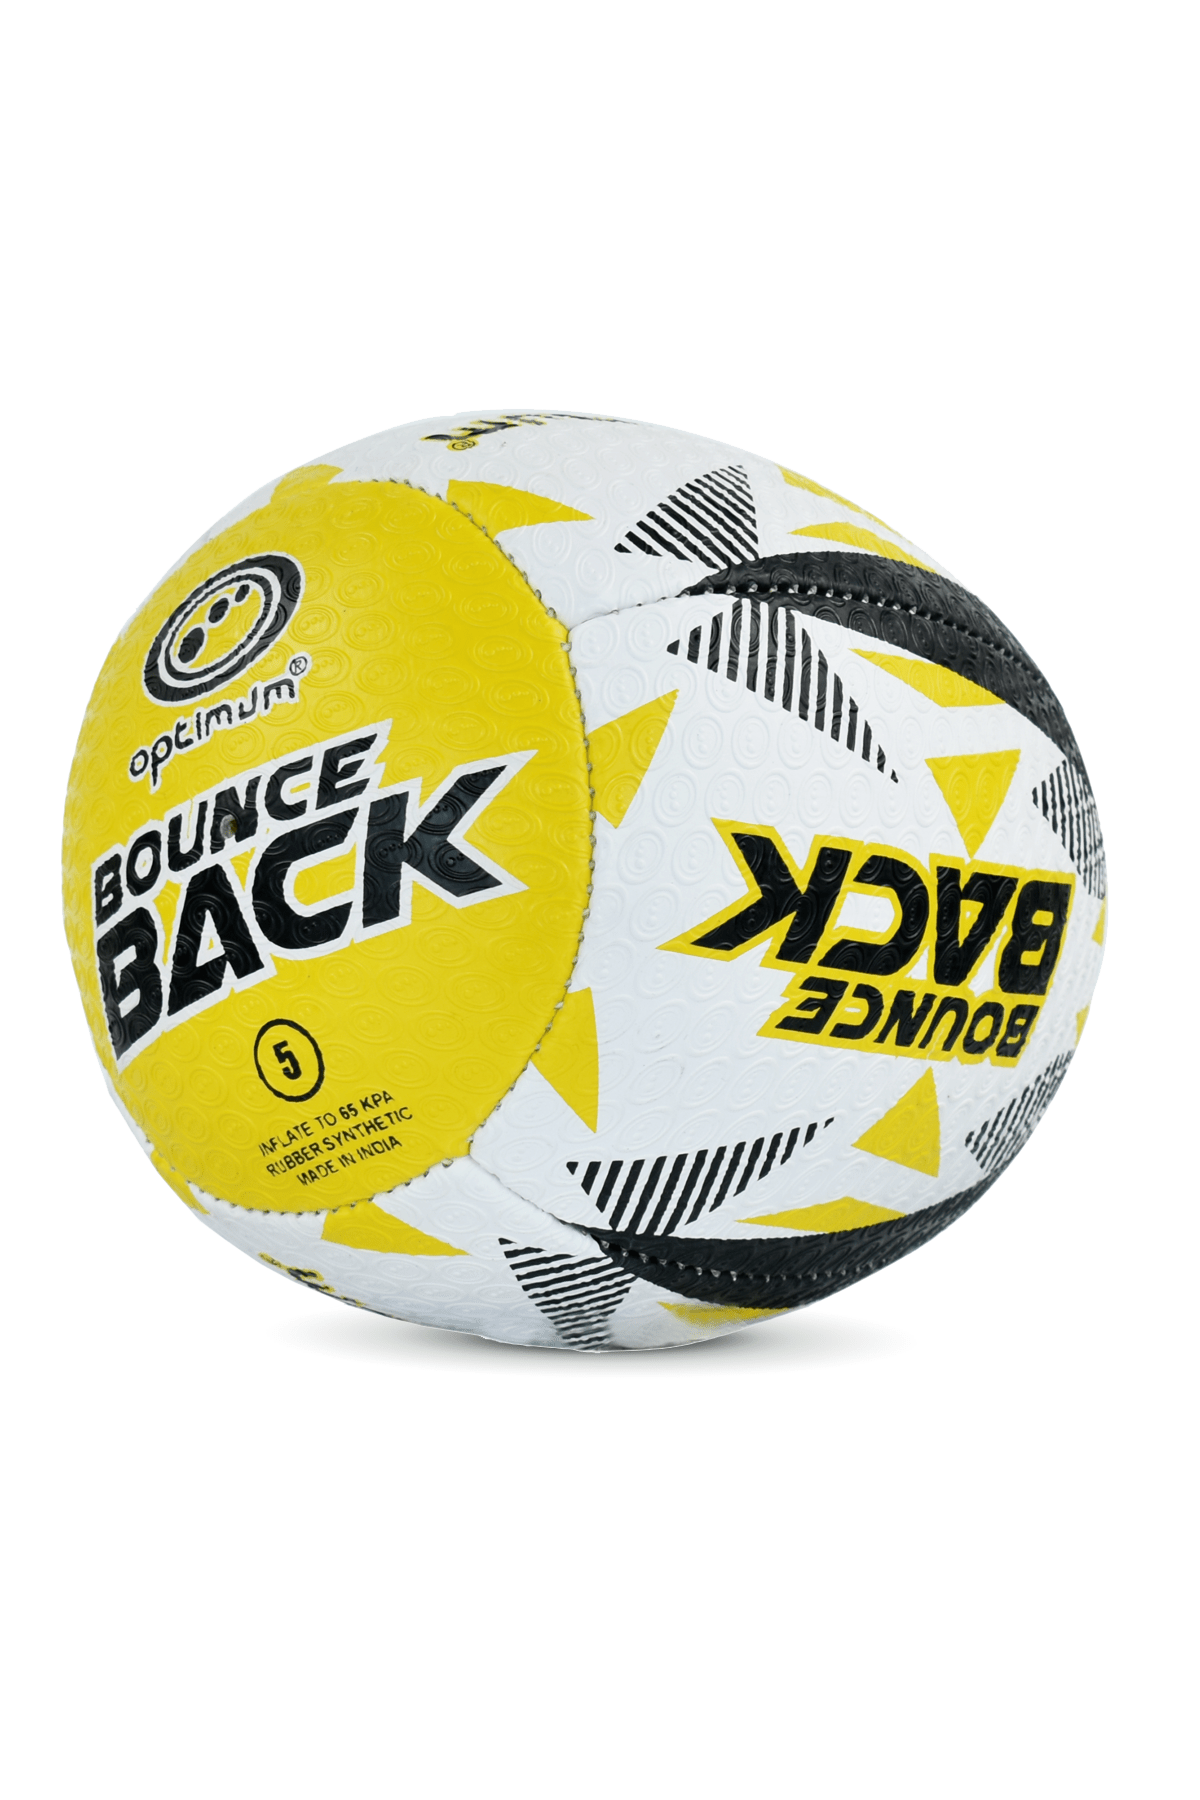 Rugby Bounce Back Solo Skills Ball Football Sports Practice - Optimum